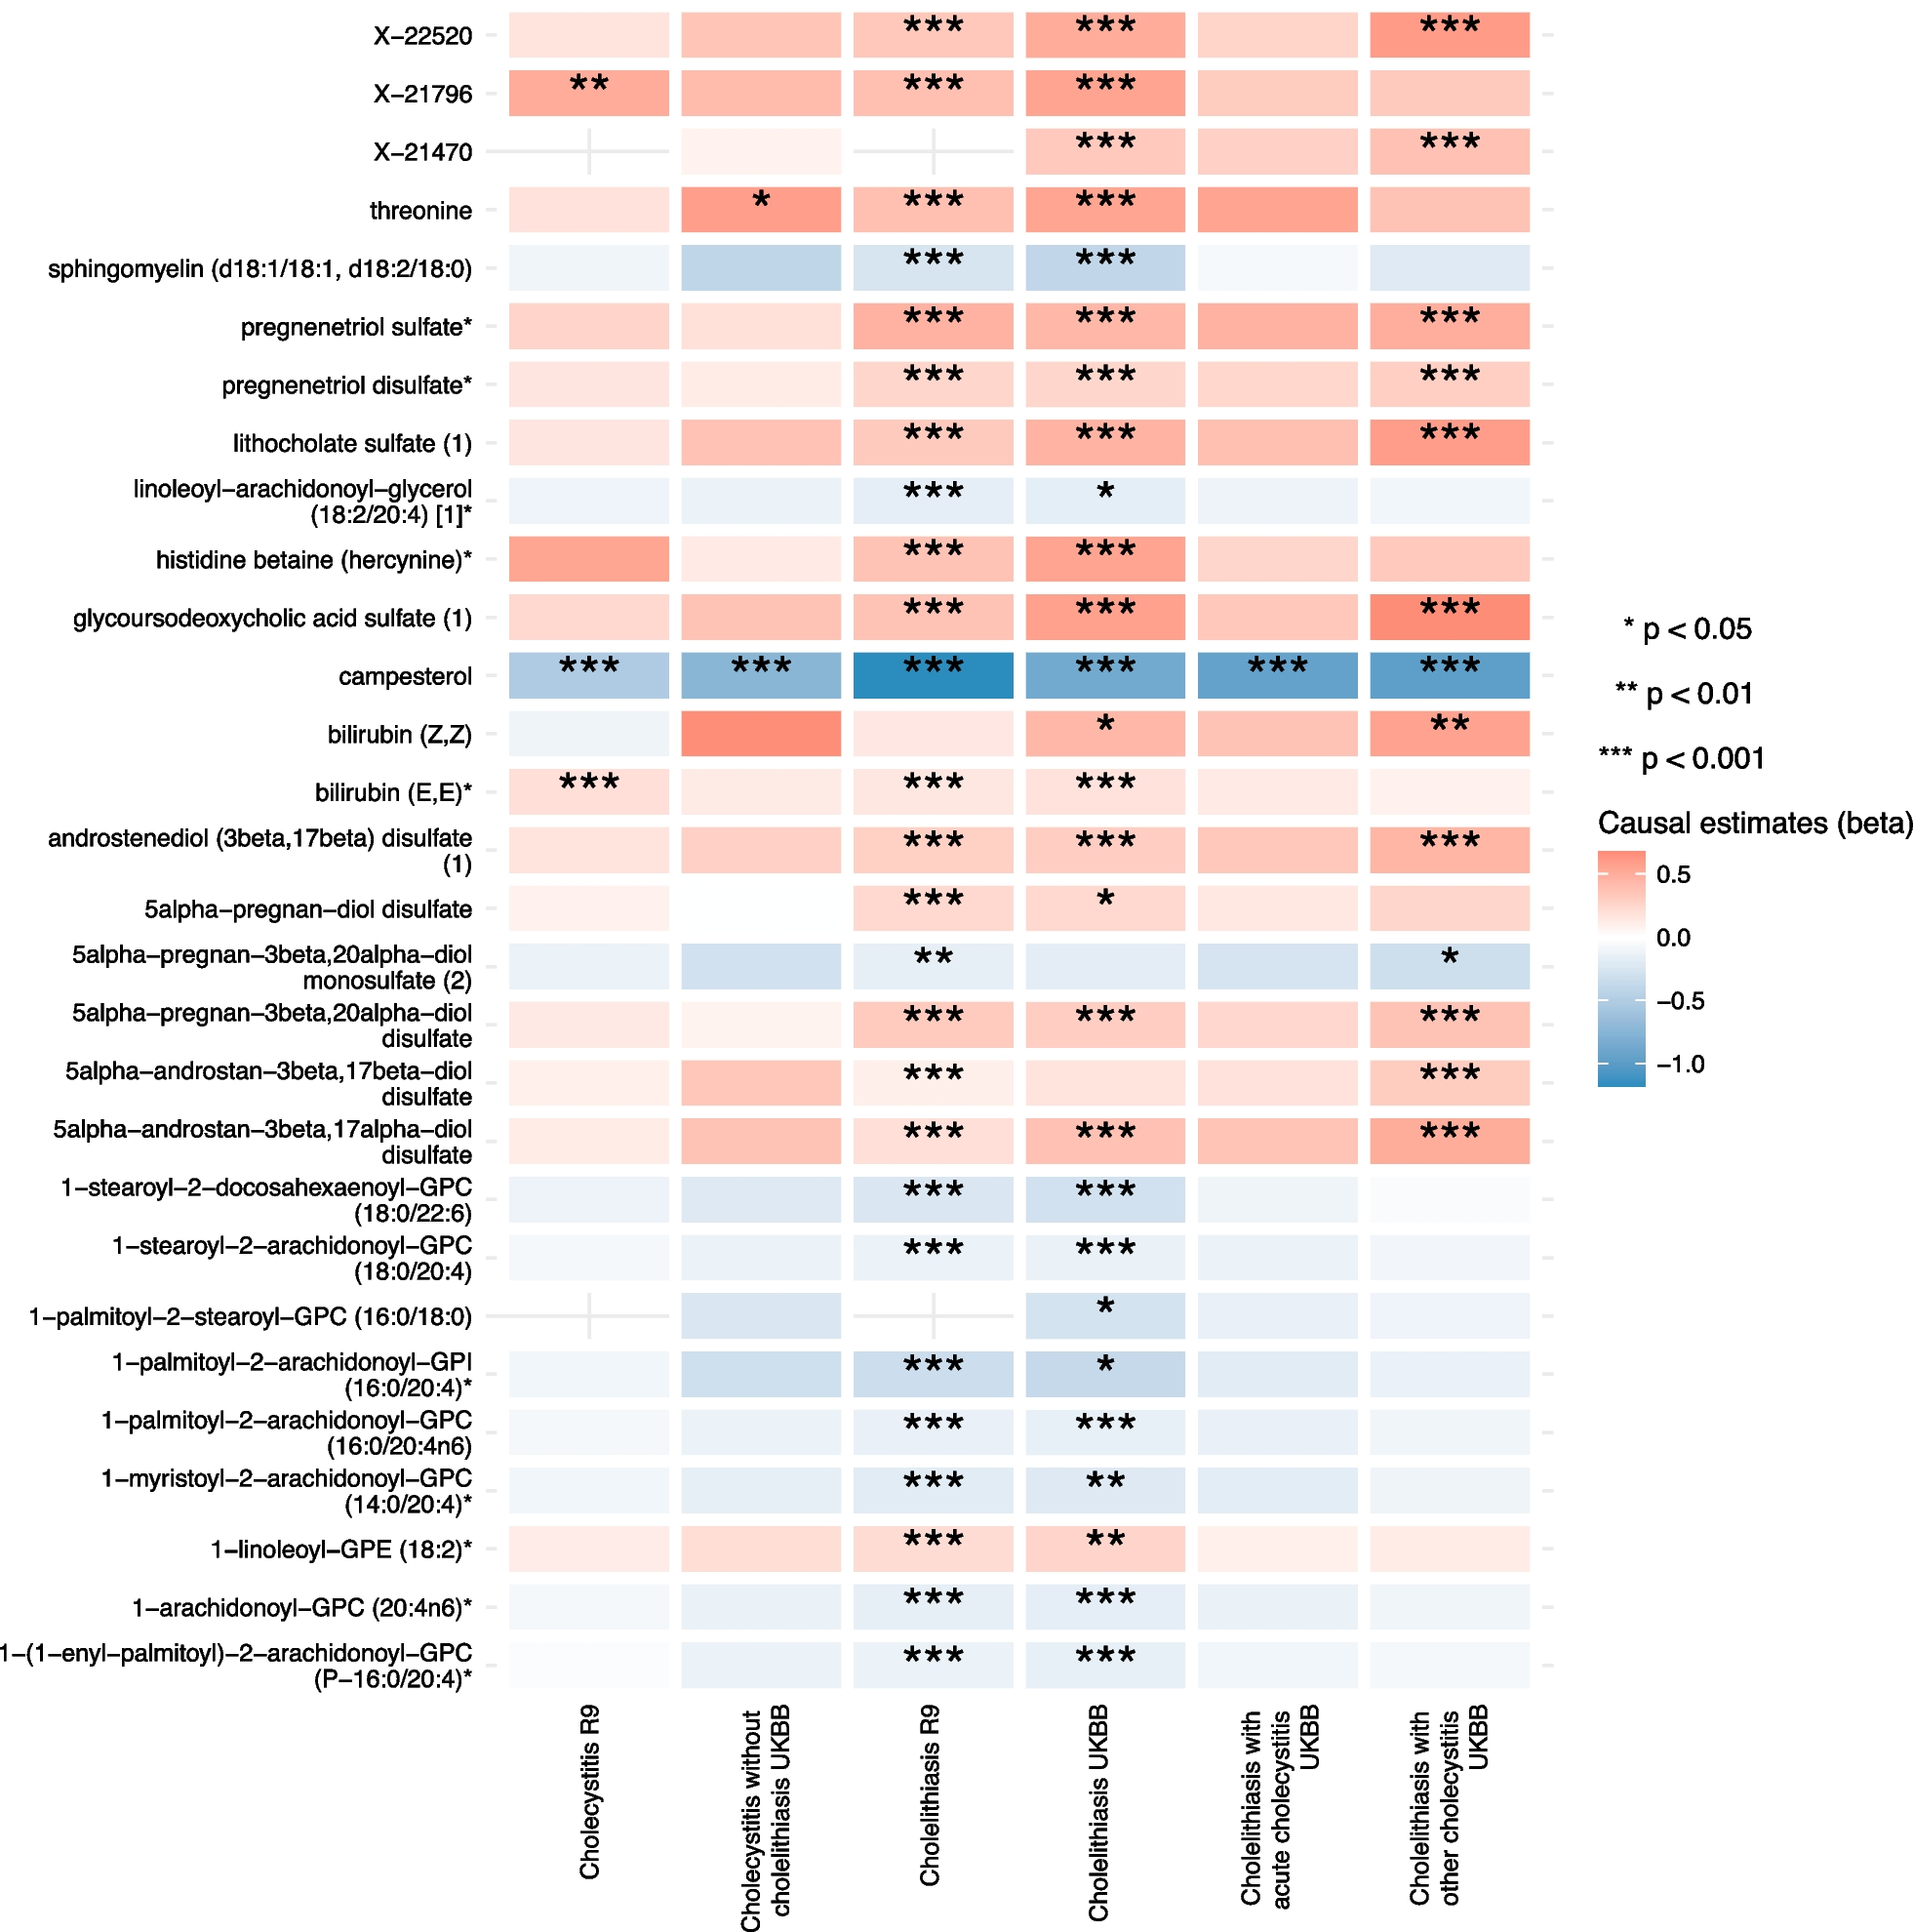 Plasma campesterol and ABCG5/ABCG8 gene loci on the risk of cholelithiasis and cholecystitis: evidence from Mendelian randomization and colocalization analyses